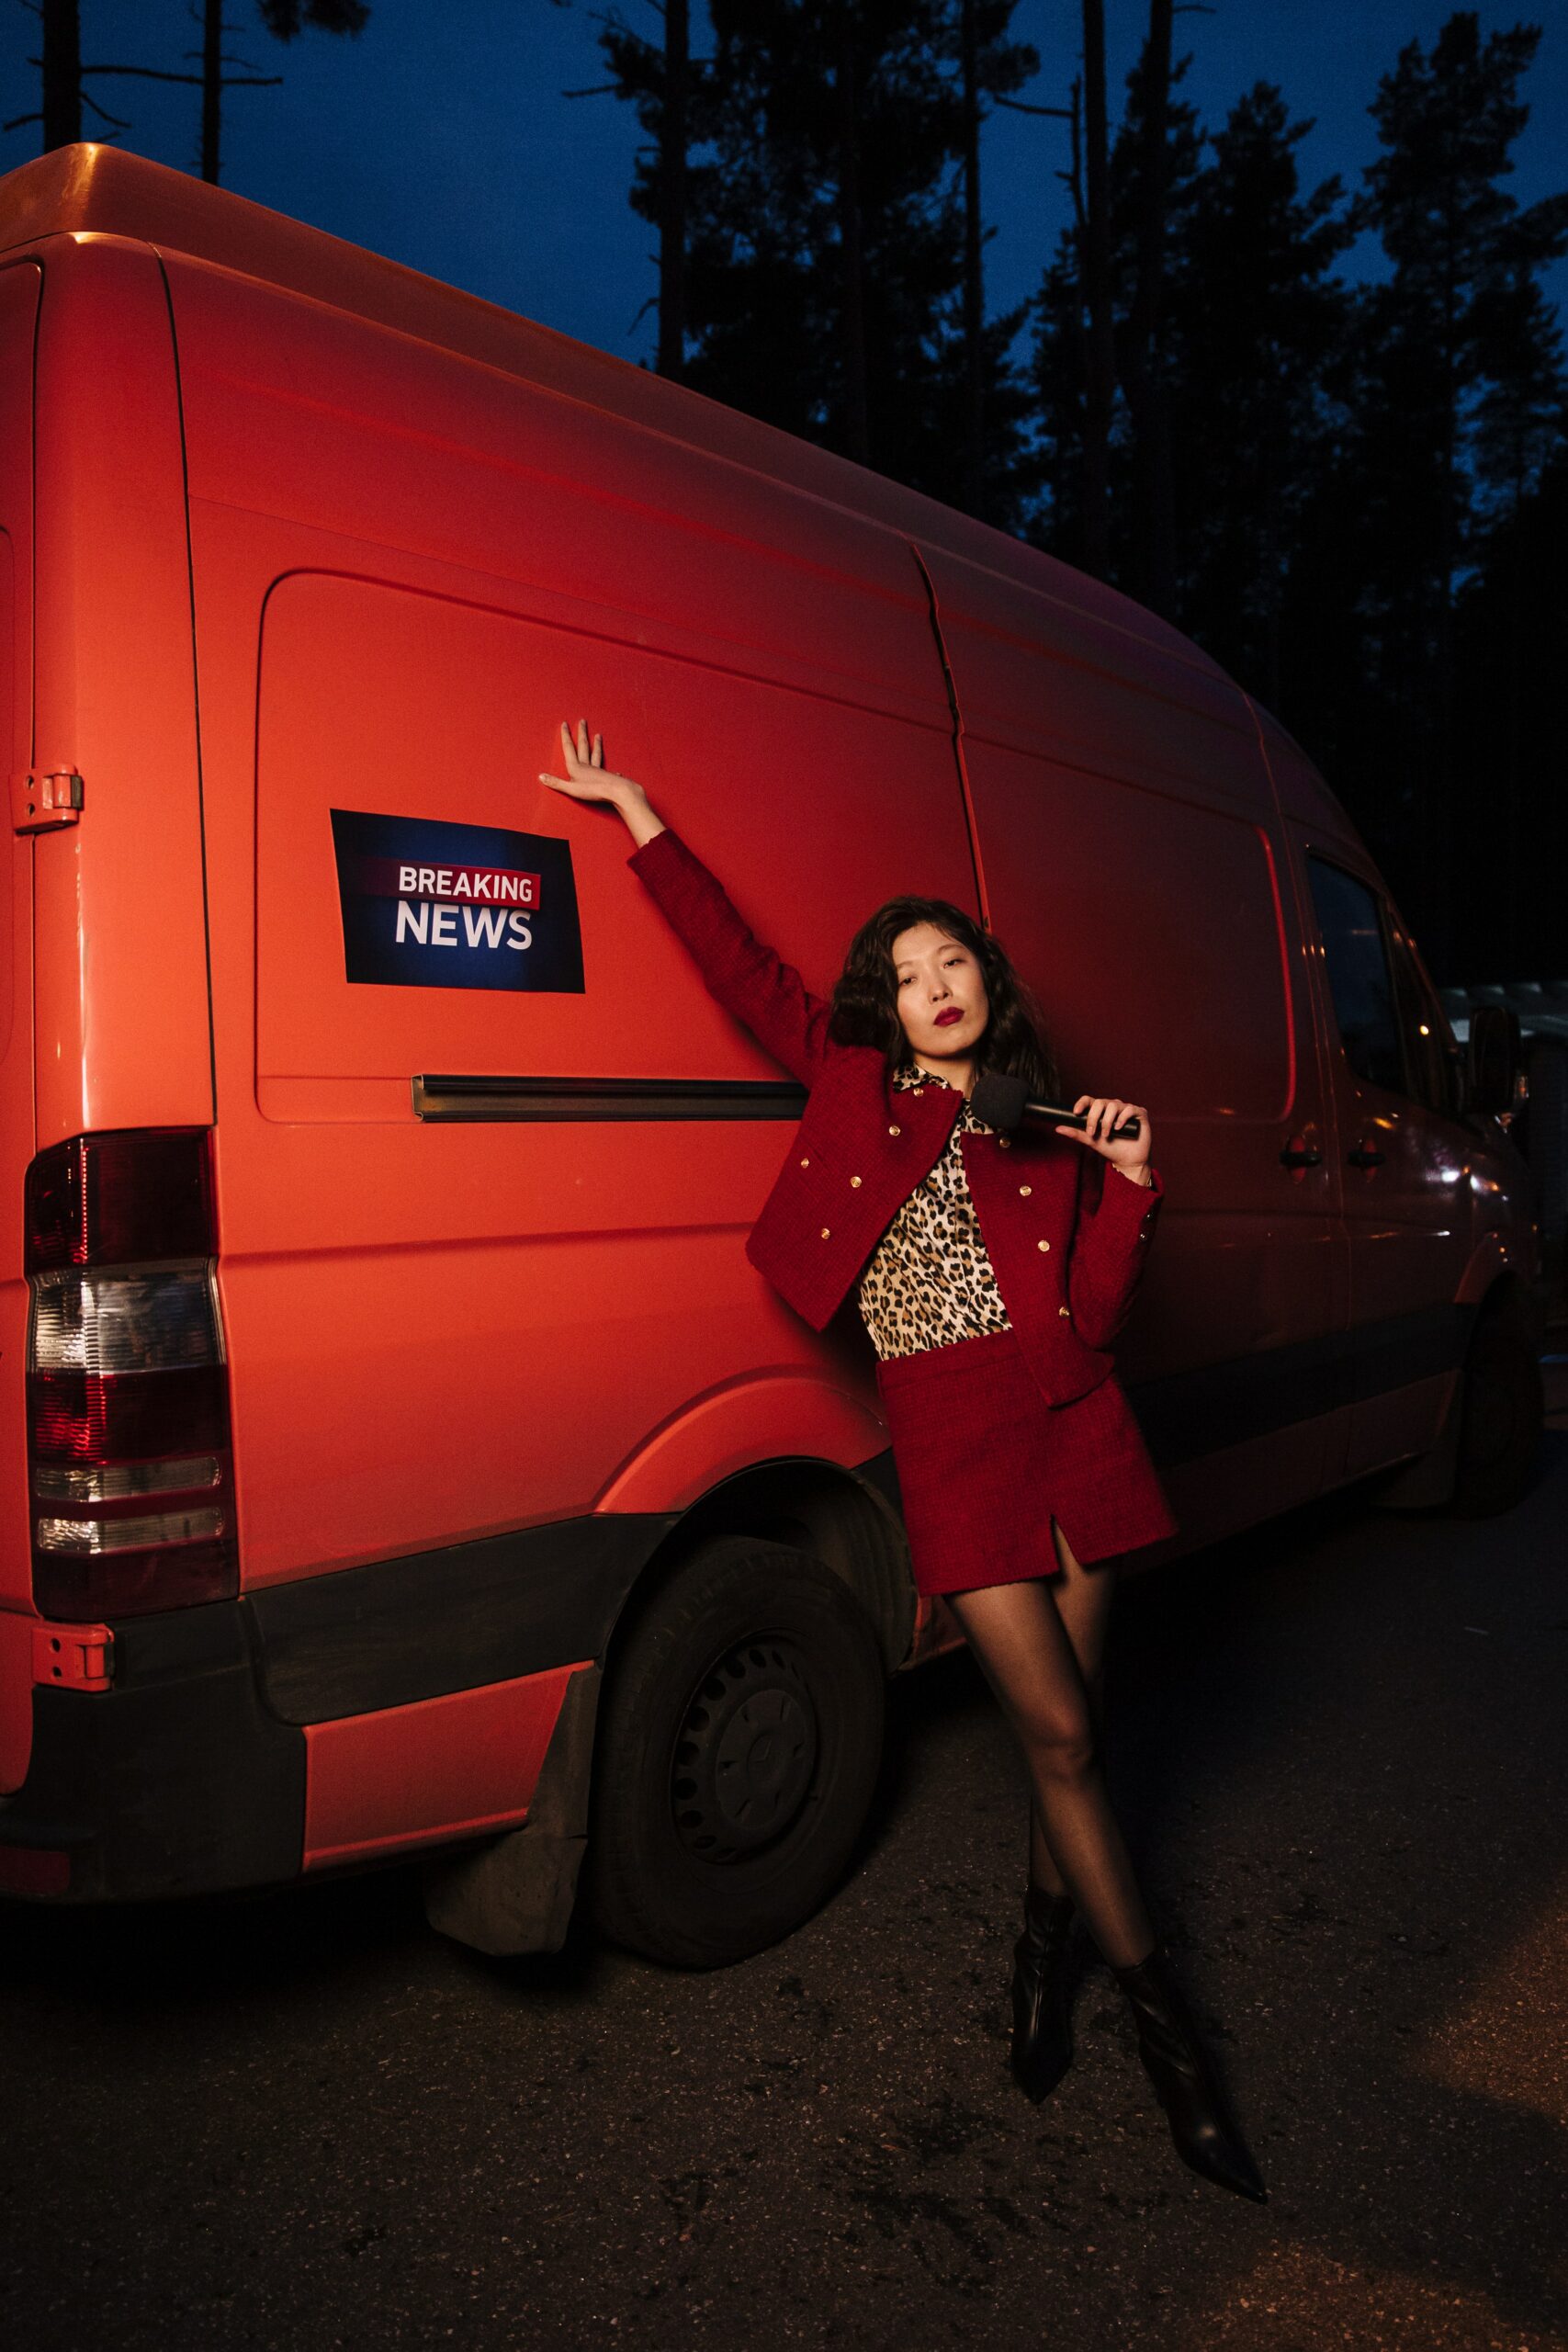 A woman in a red blazer and skirt standing near a news van